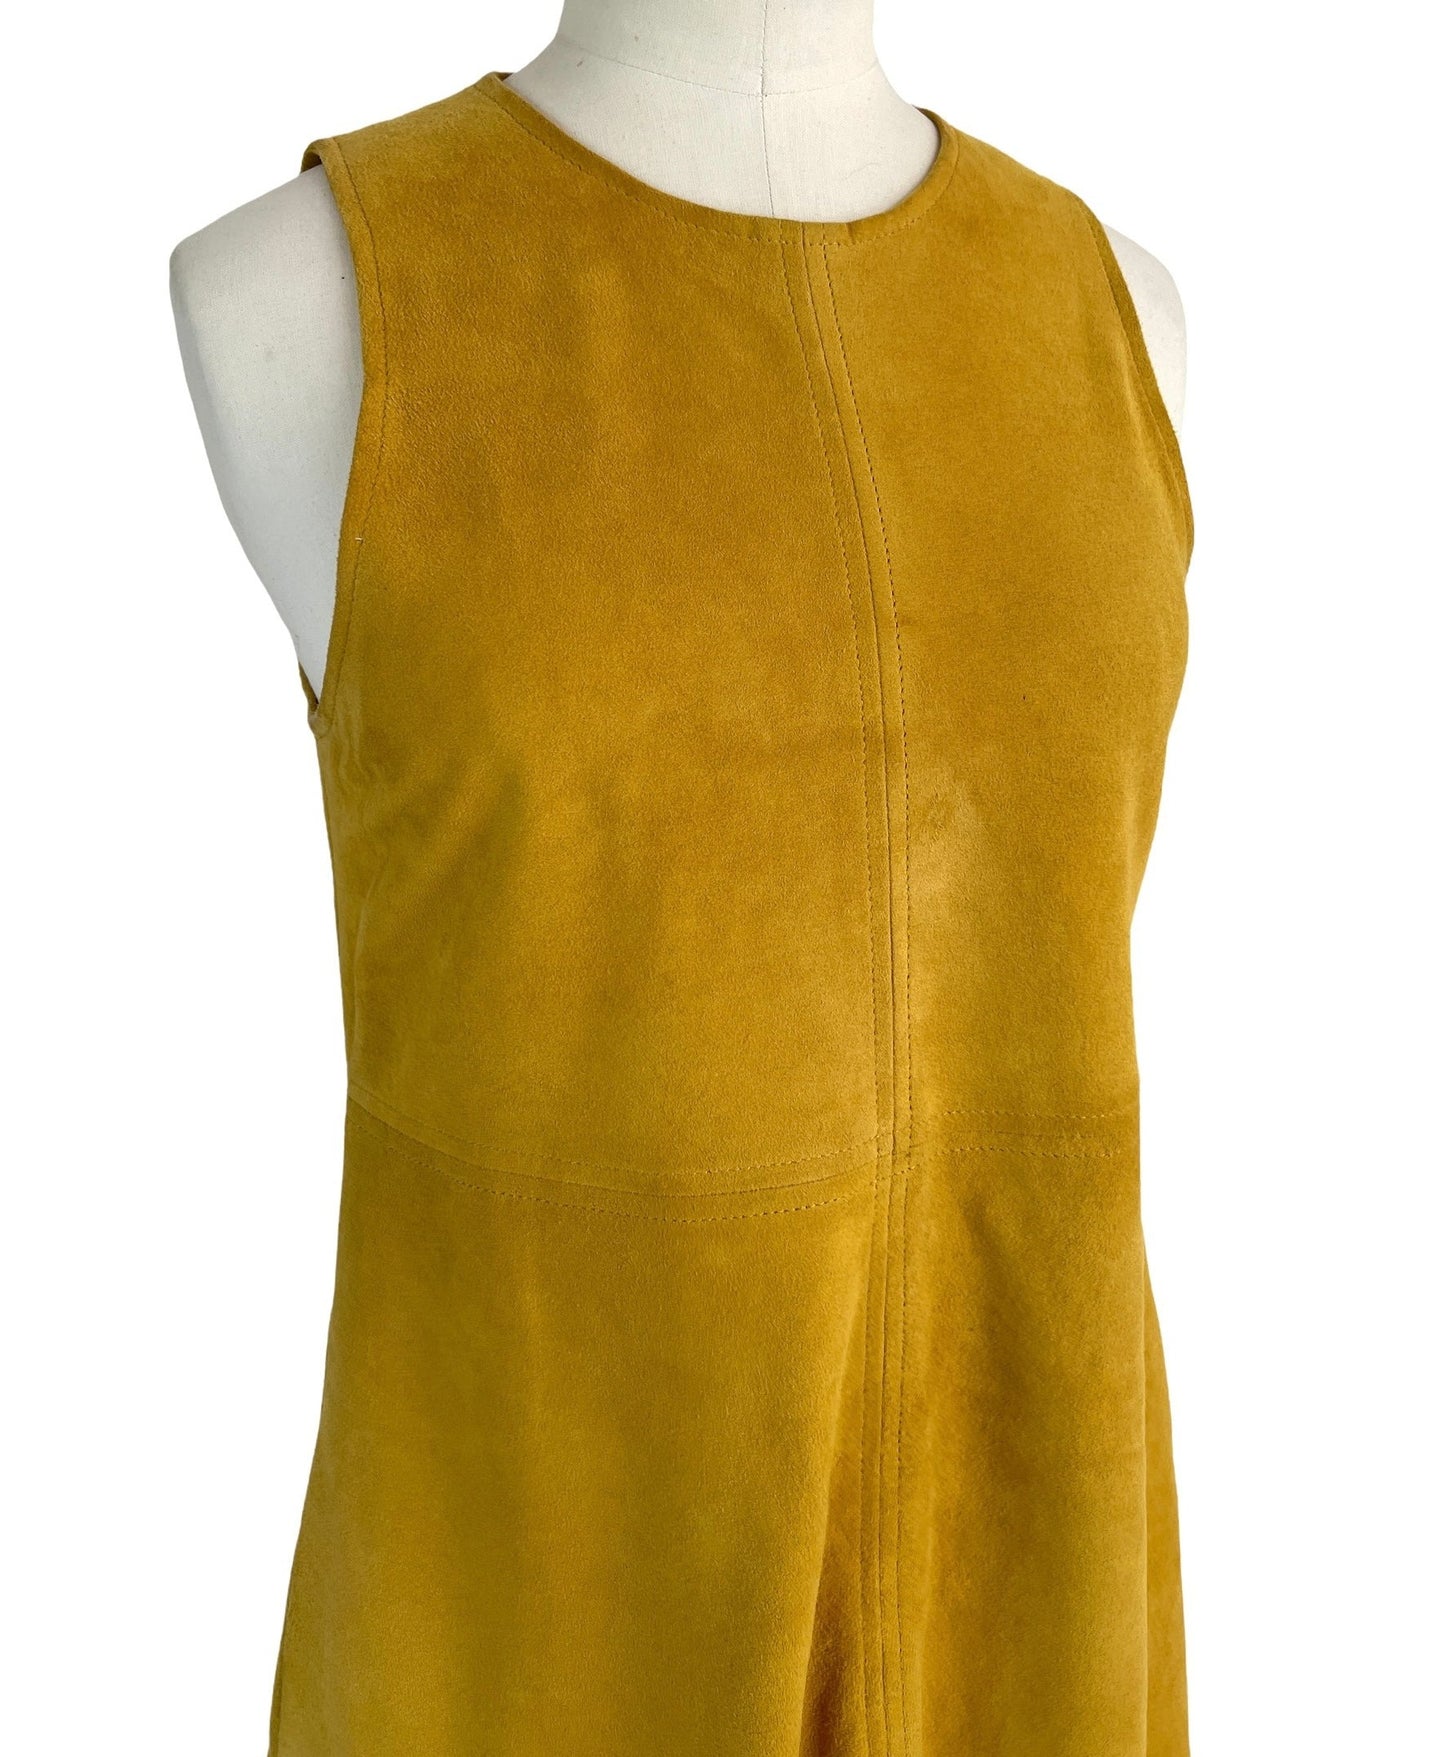 Suede Yellow Dress - 2